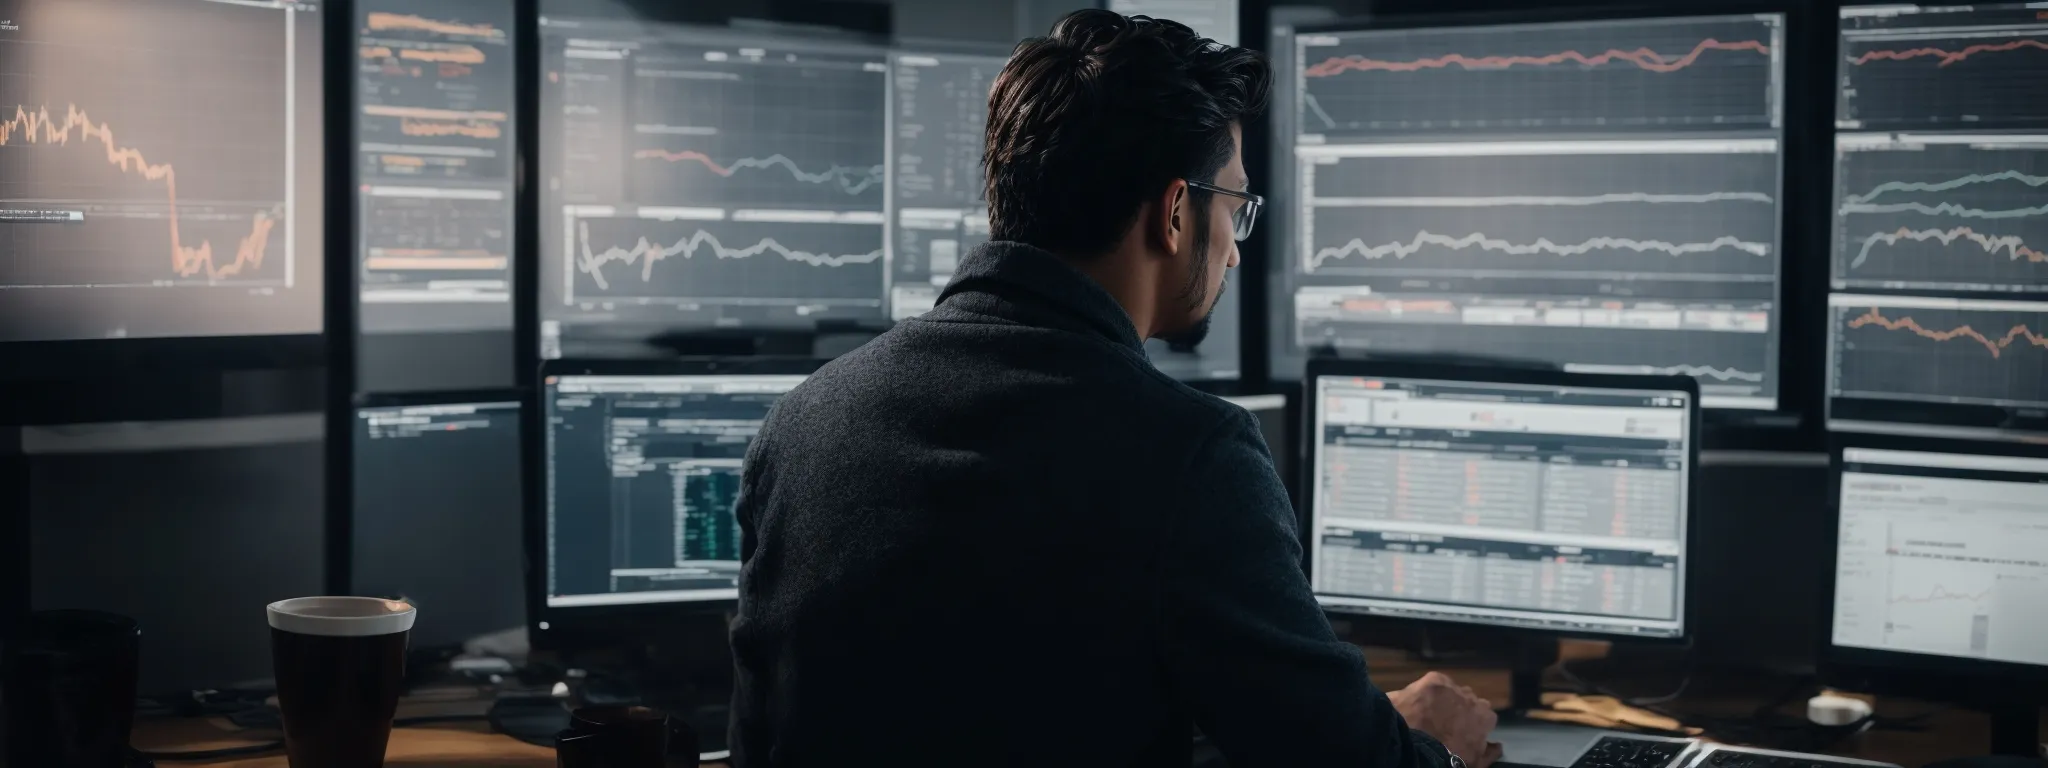 a digital marketer is intently analyzing search engine results on a computer screen, surrounded by graphs and analytics dashboards reflecting seo performance.